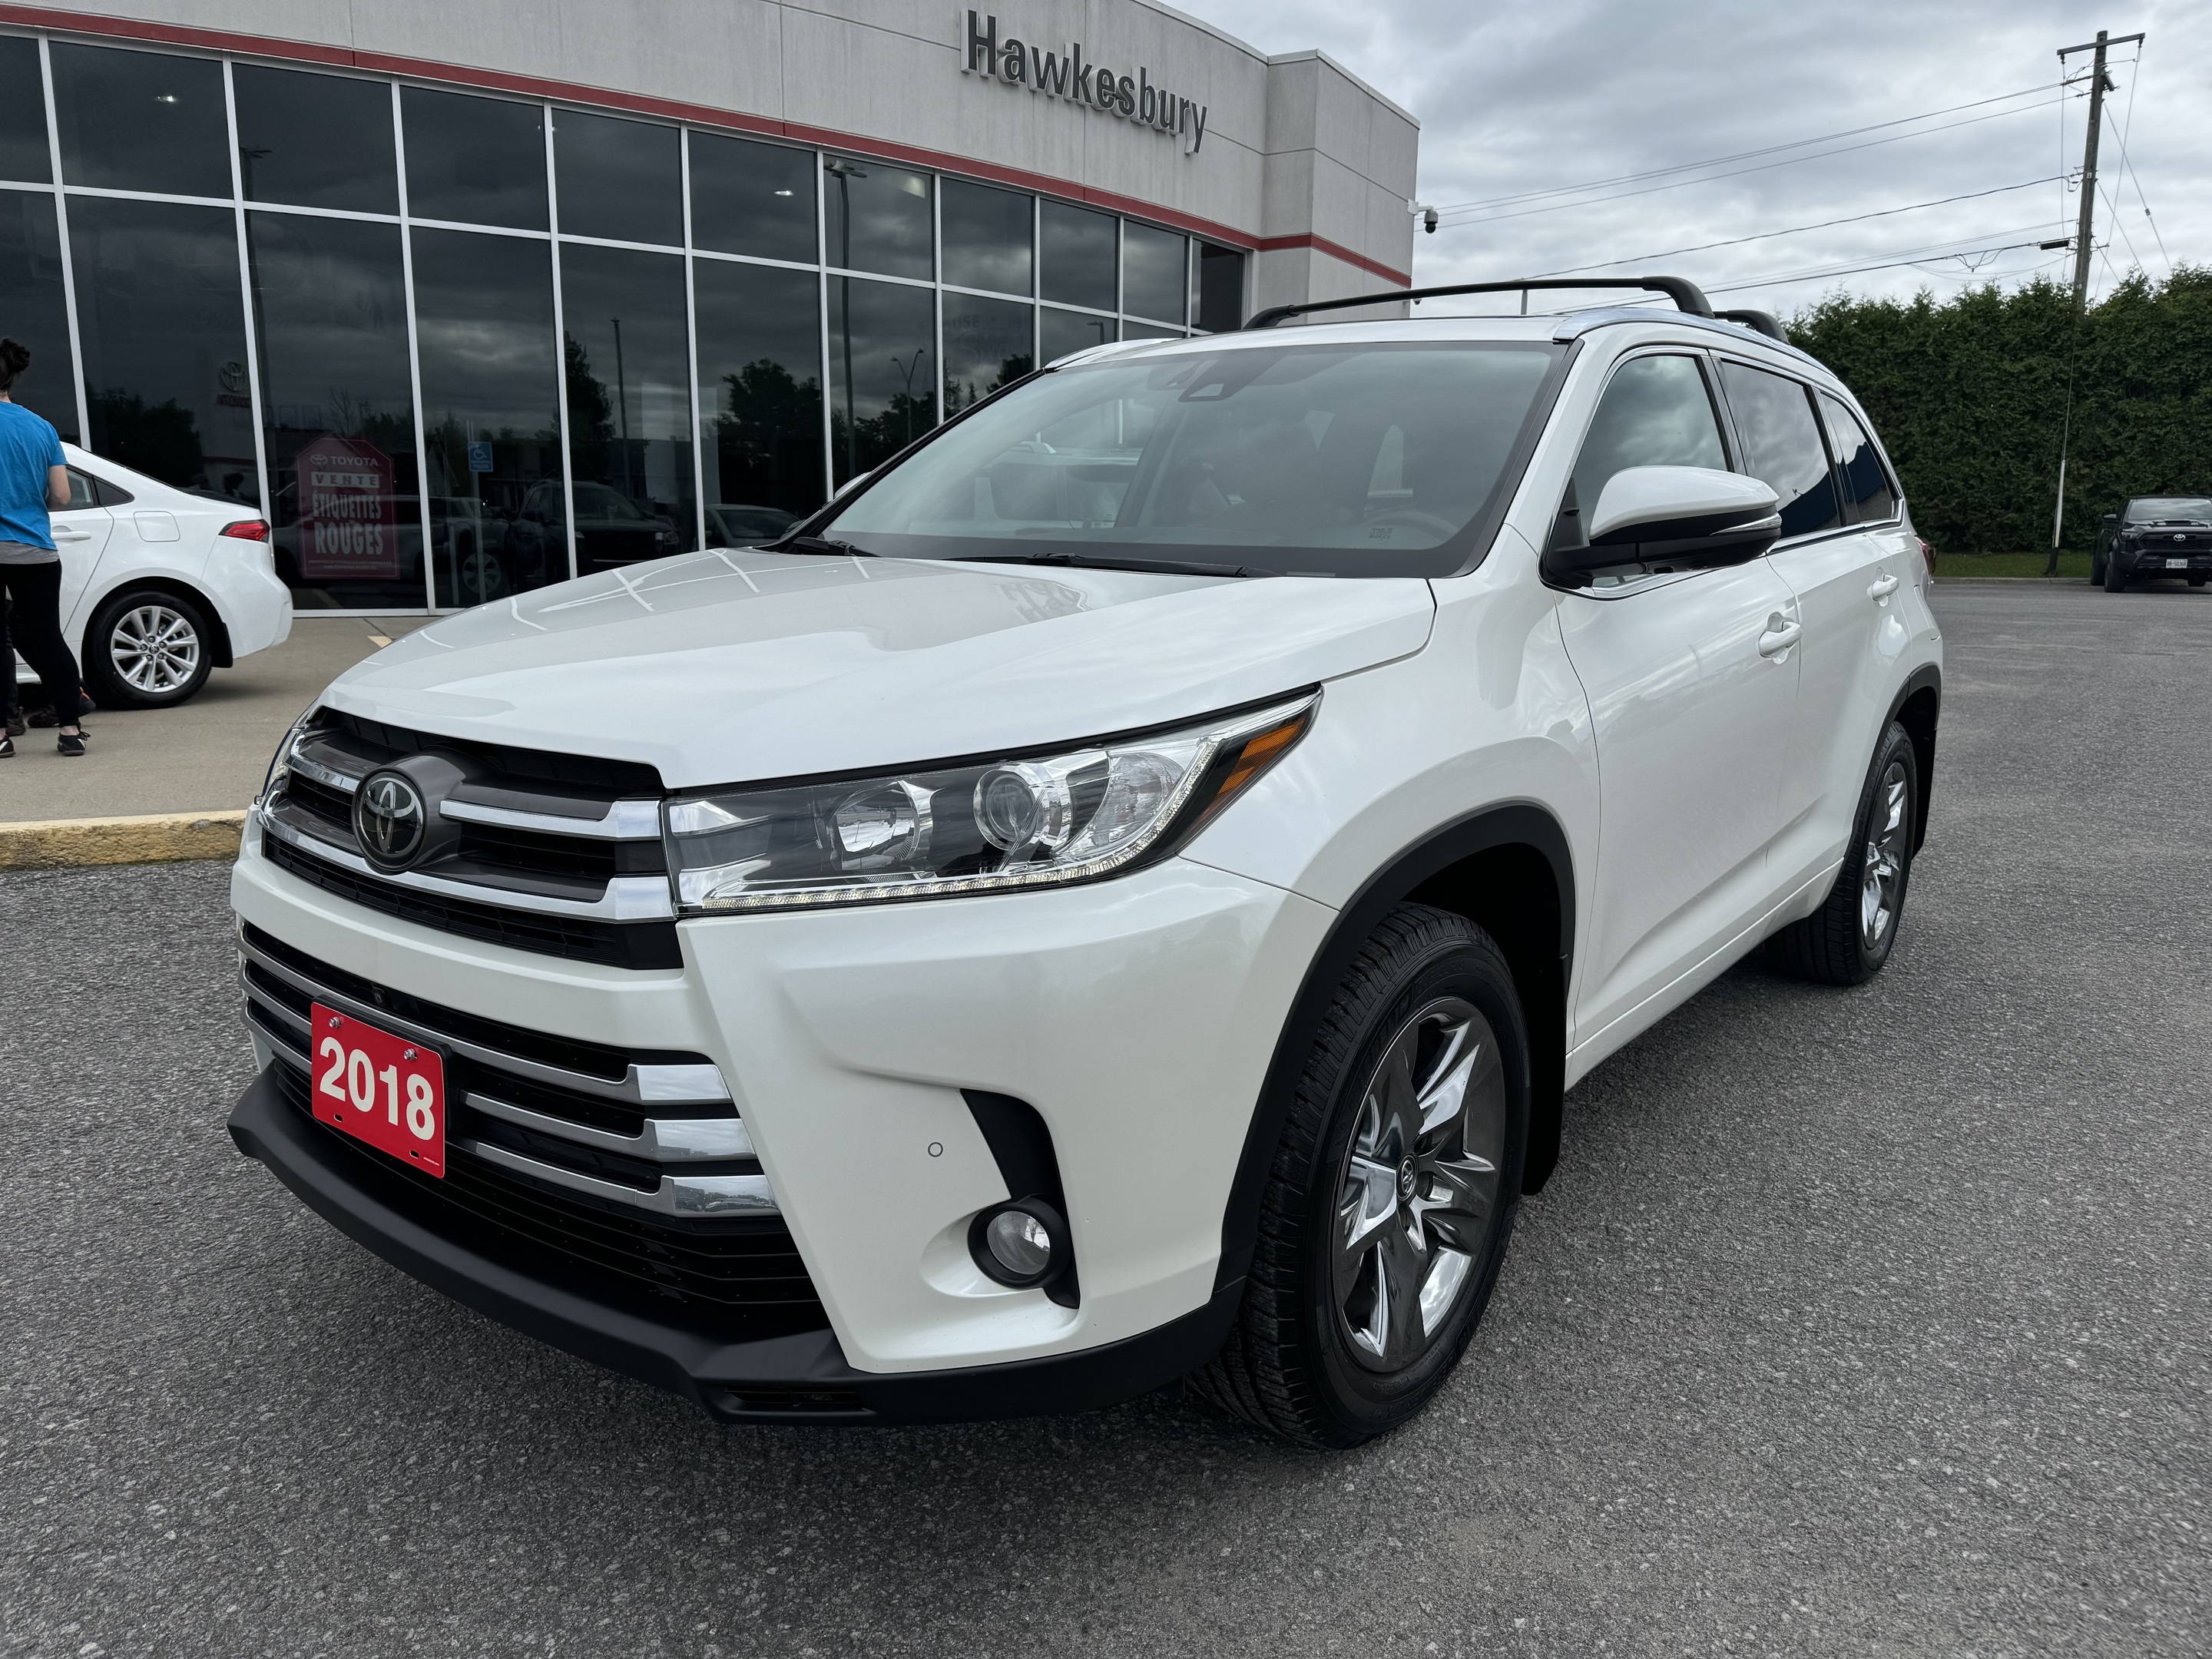 2018 Toyota Highlander LIMITED AWD 7 PASS NAVIGATION HEATED/COOLED SEATS